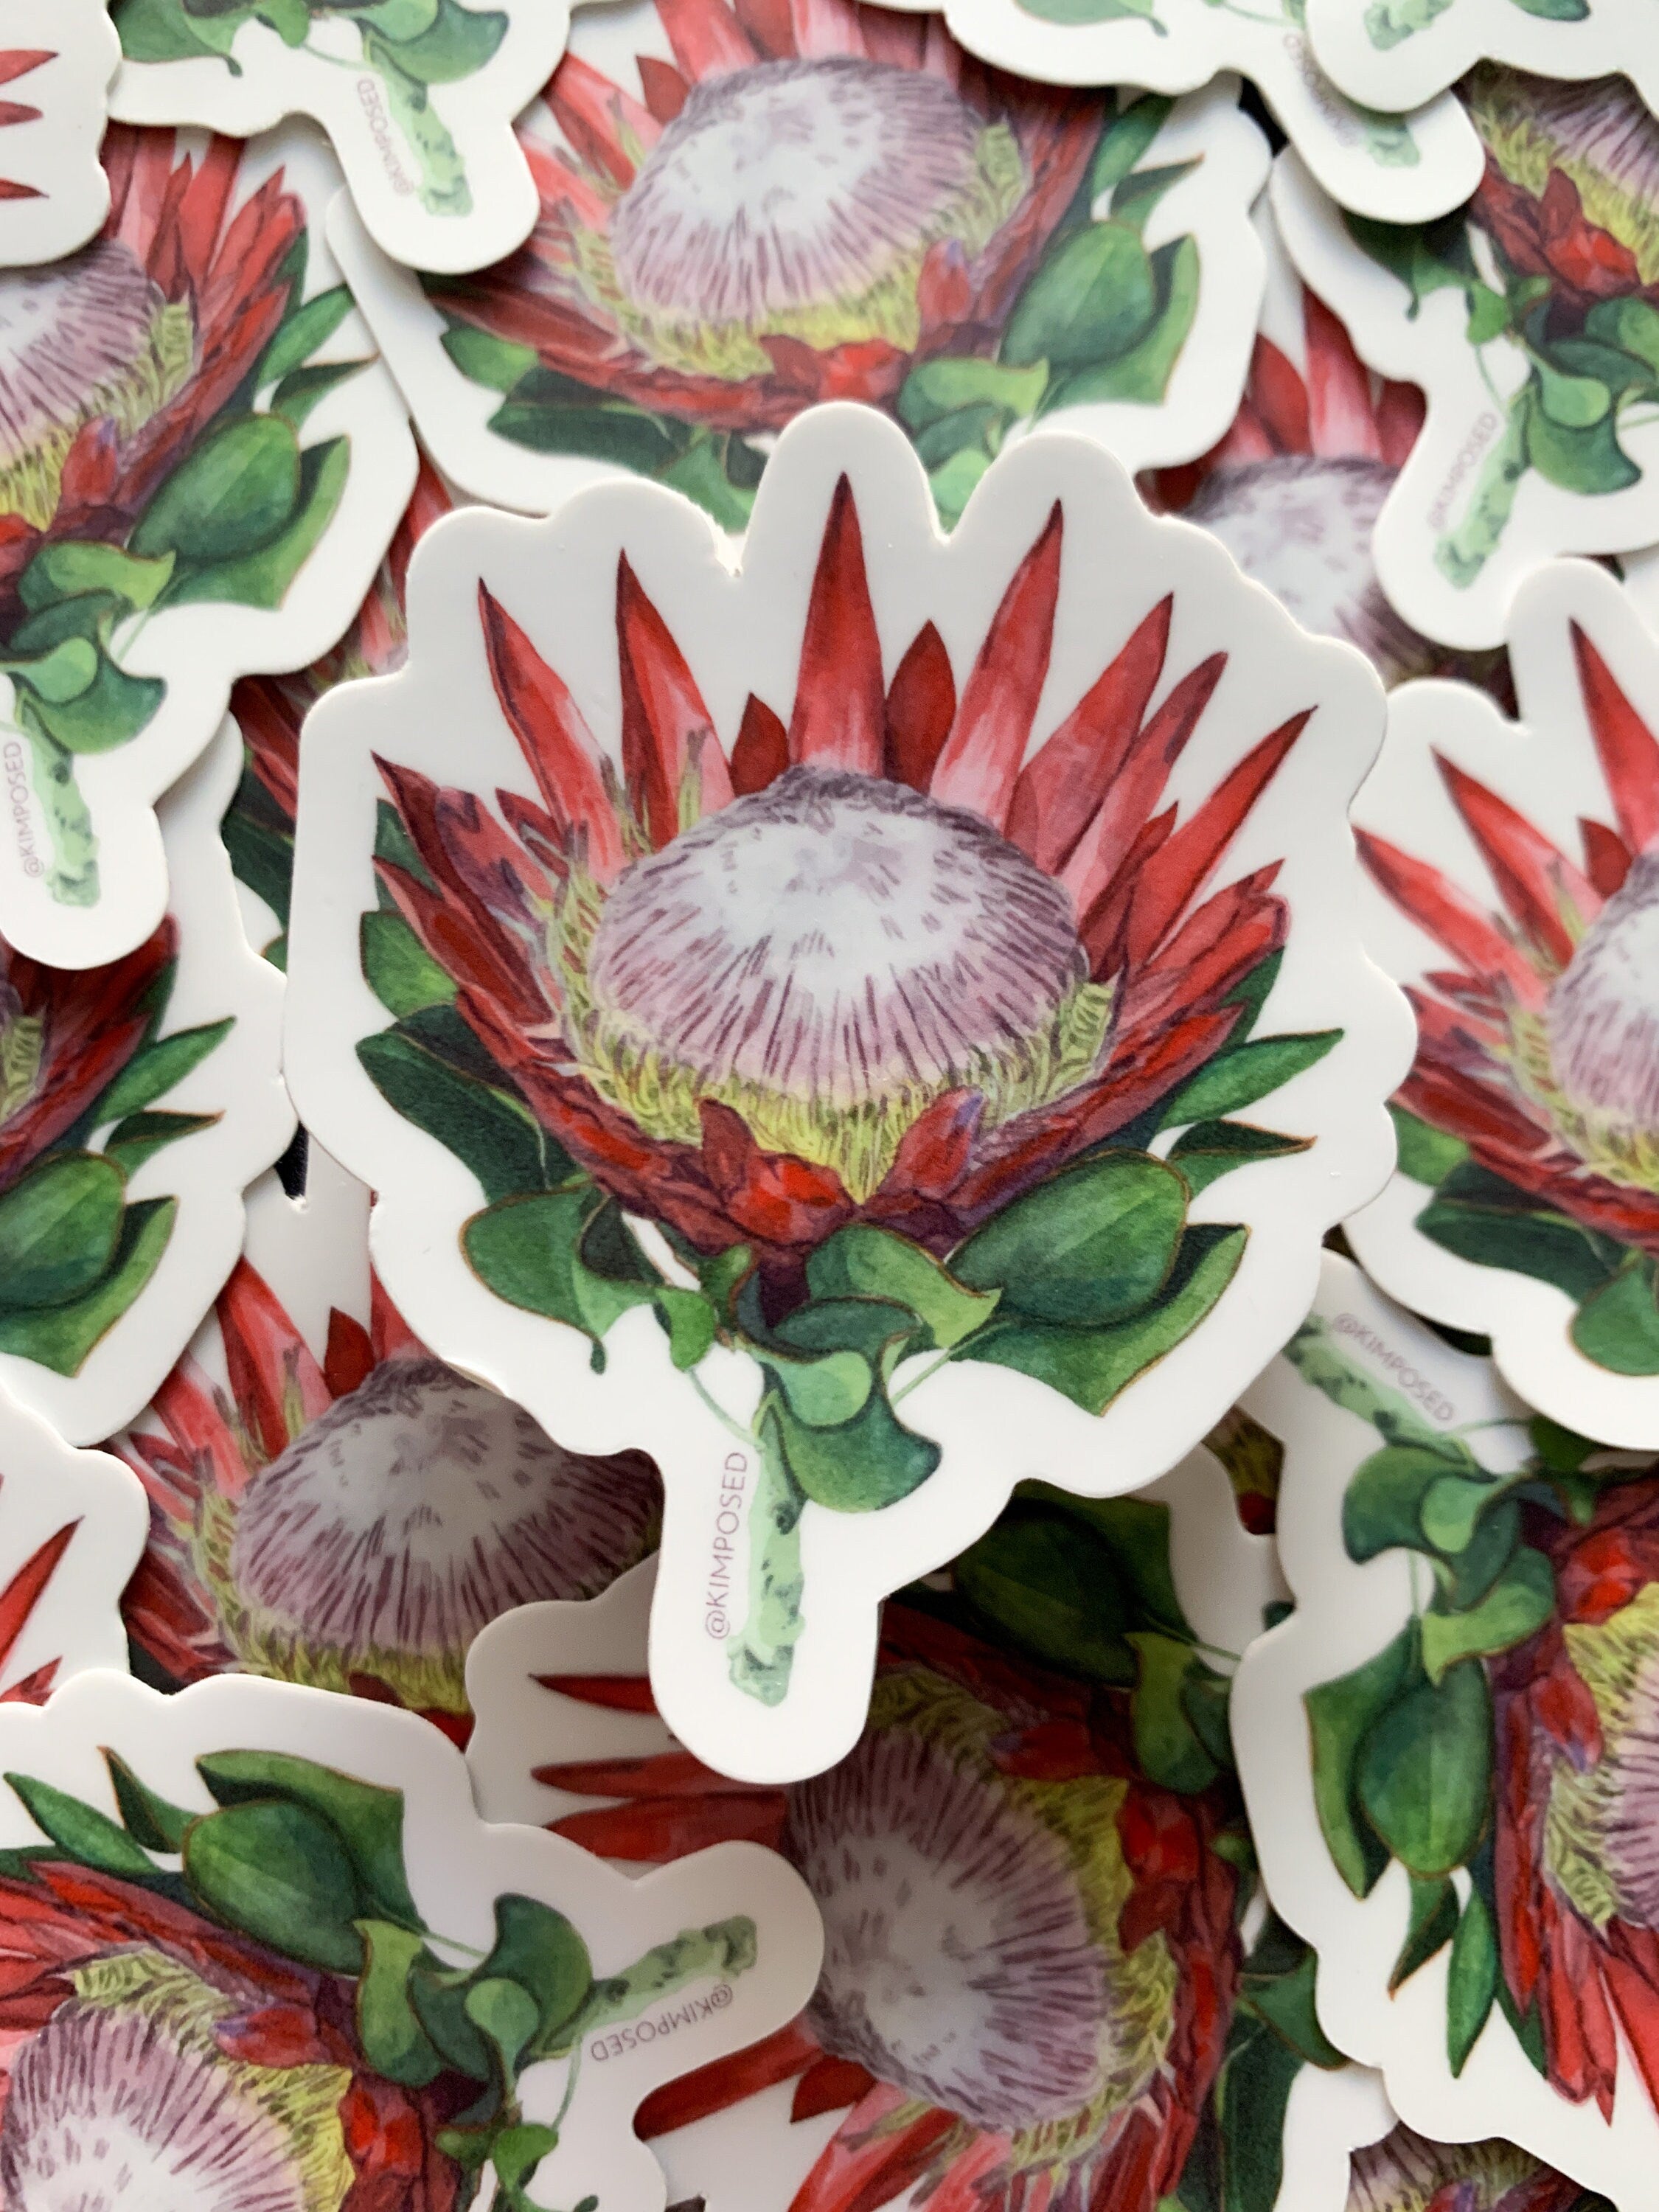 Protea Flower Trio Sticker Pack - Three 3" Waterproof Vinyl Stickers for Water Bottles, Laptops, Phones & More *FREE USA SHIPPING*